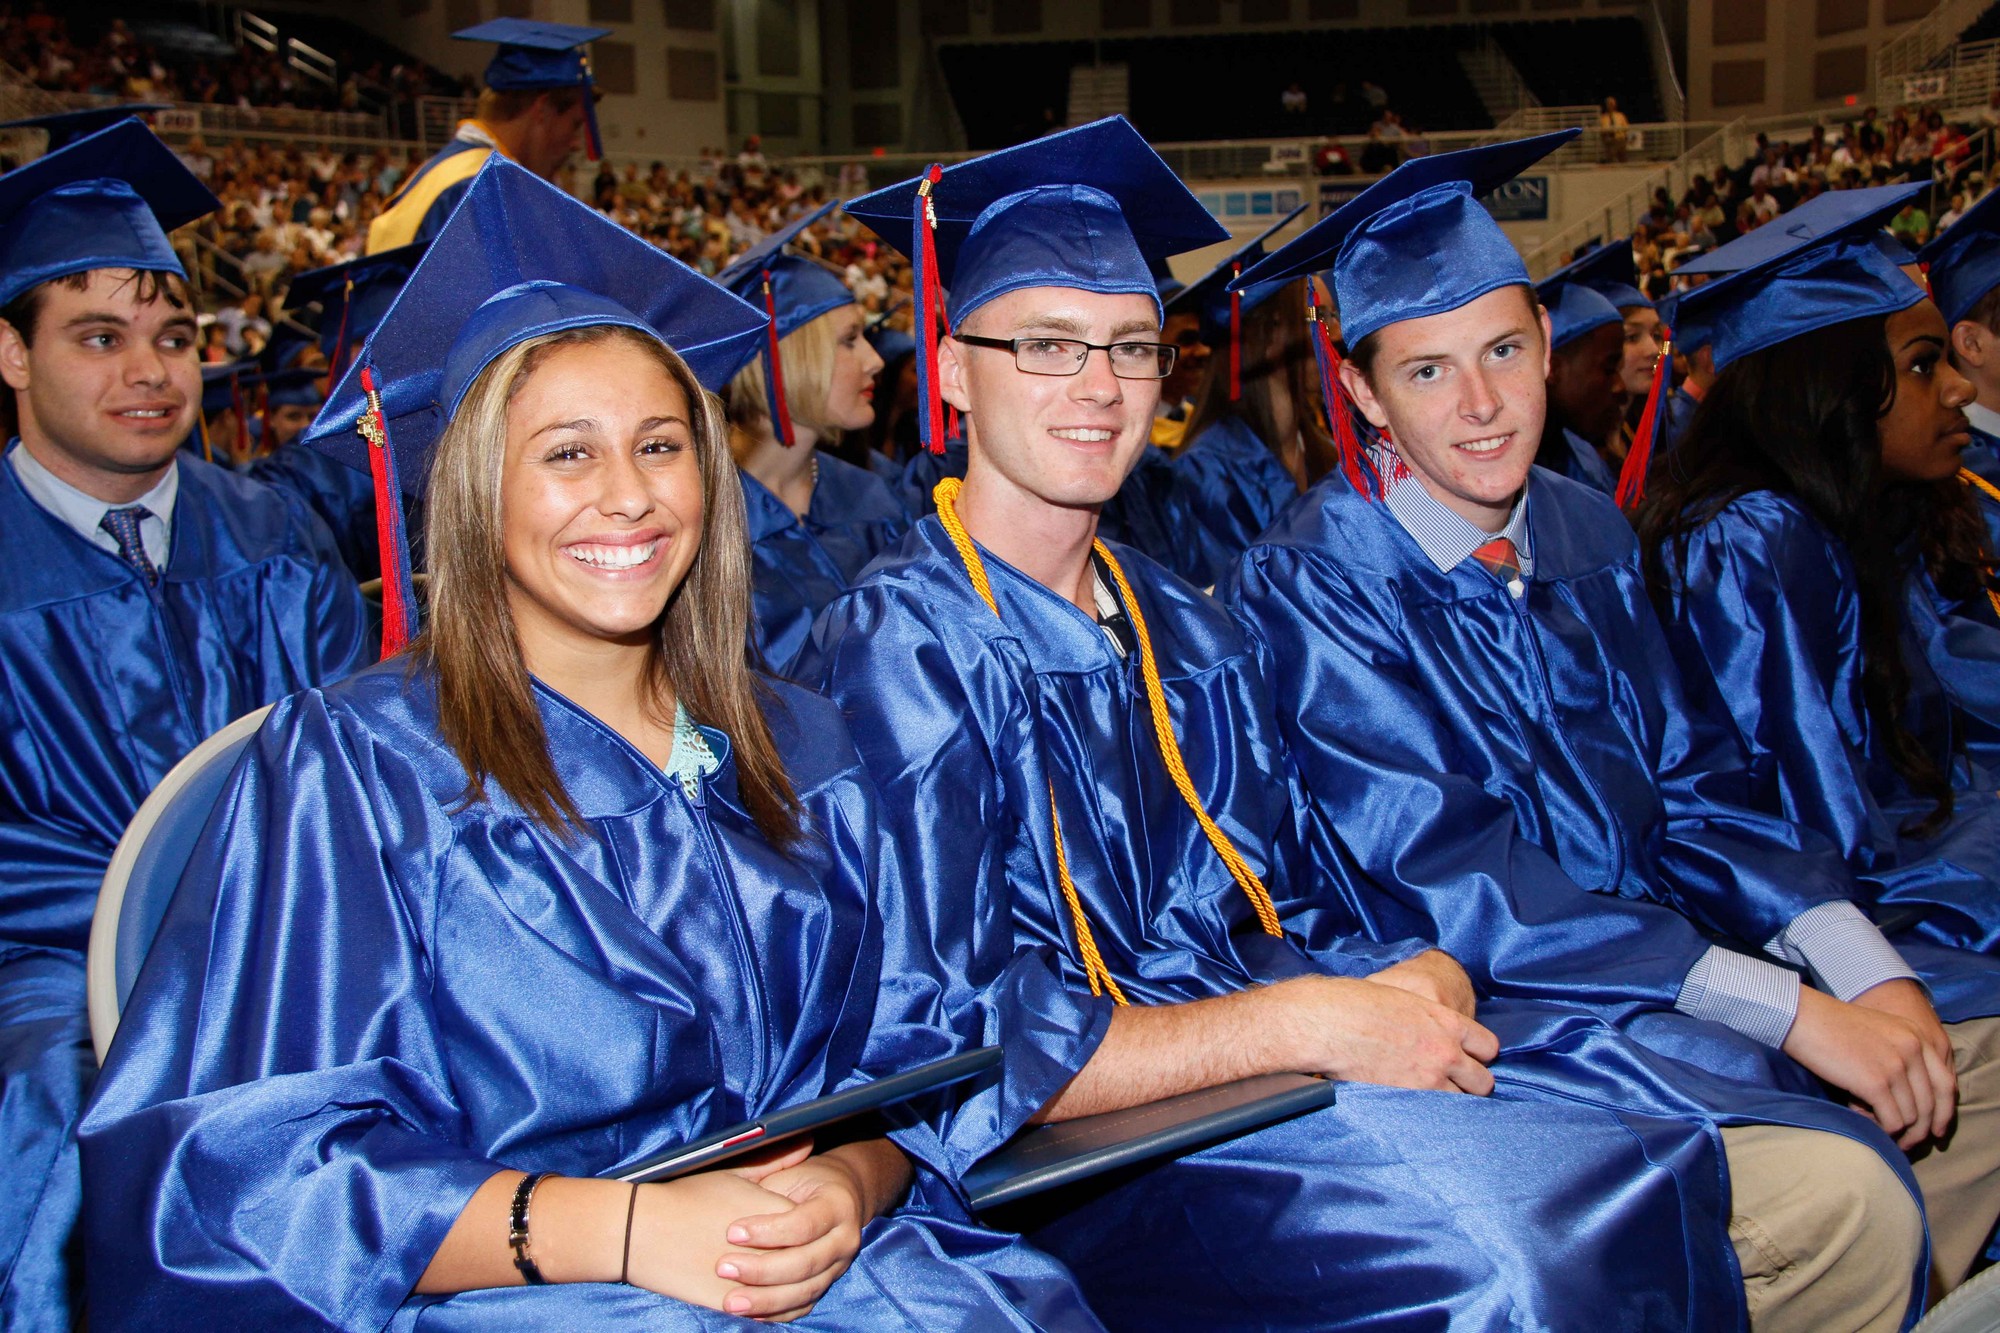 Tina Barricelli, Justin Barrero and Liam Baker were all smiles after receiving their diplomas.